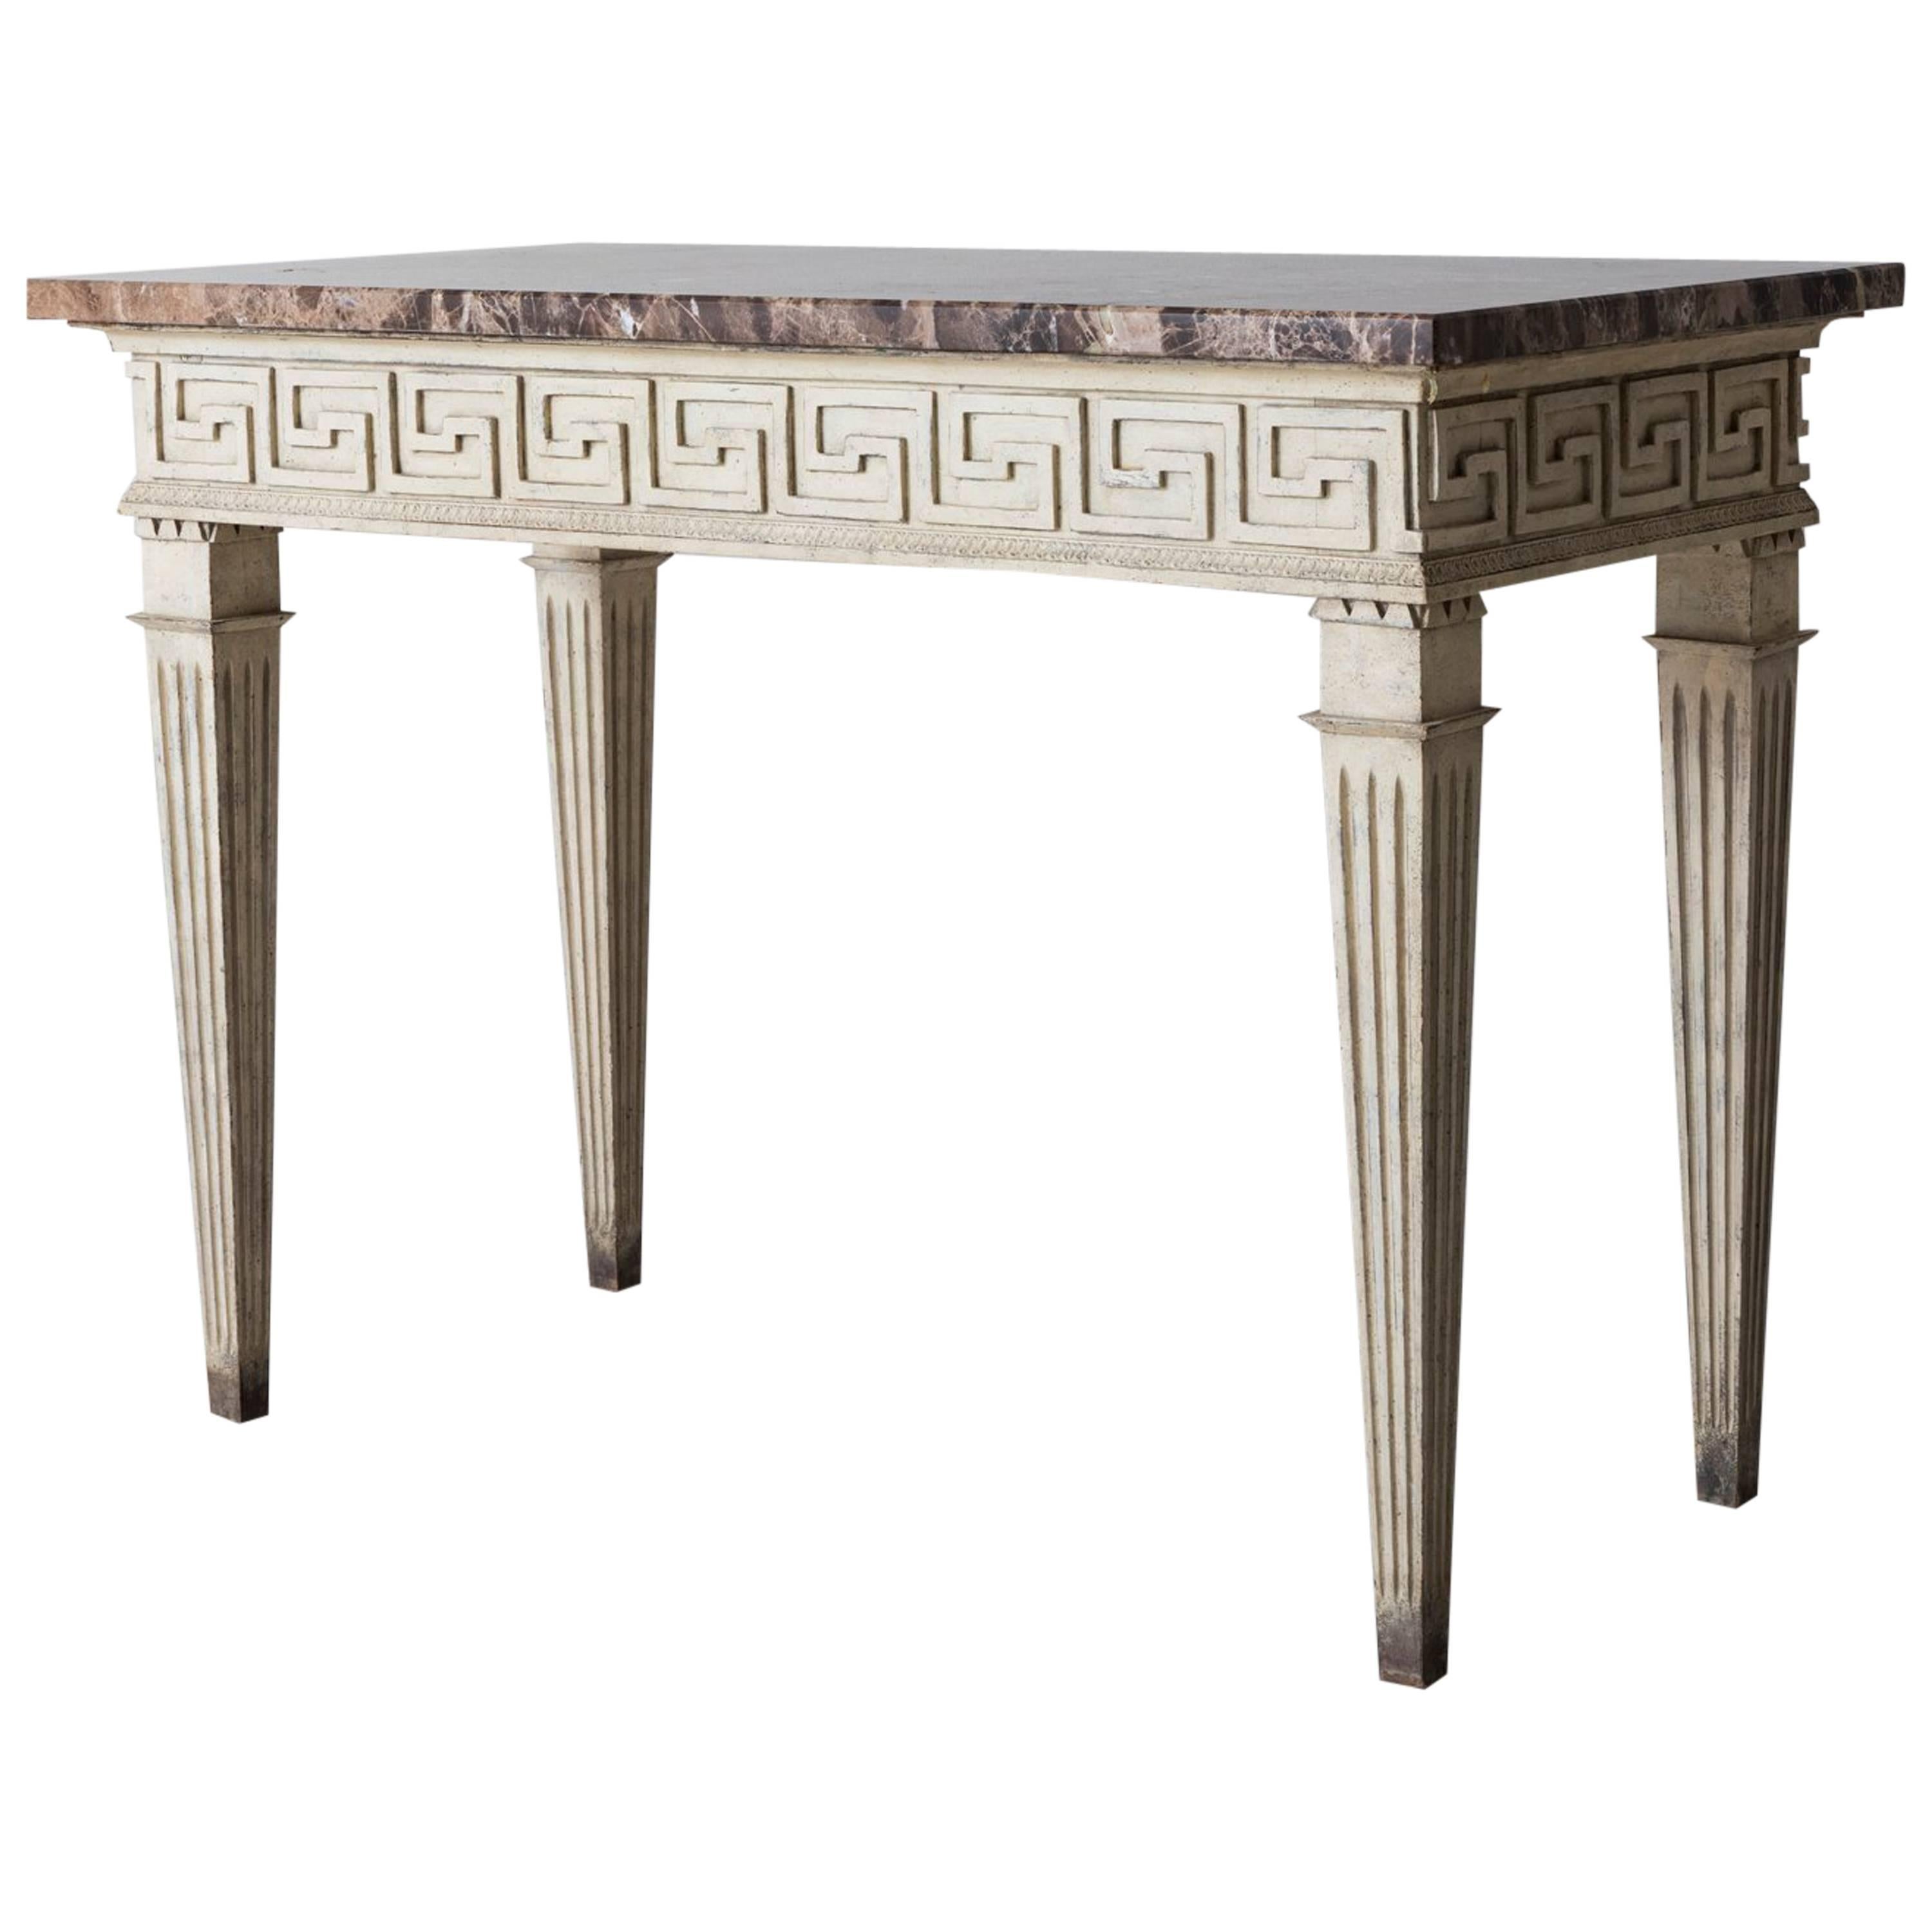 A French original paint console table in the Louis XVI style with original marble top. The apron is finished on all four sides and features a carved neoclassical Greek key design and rests upon square, tapered and fluted legs. The apron height is